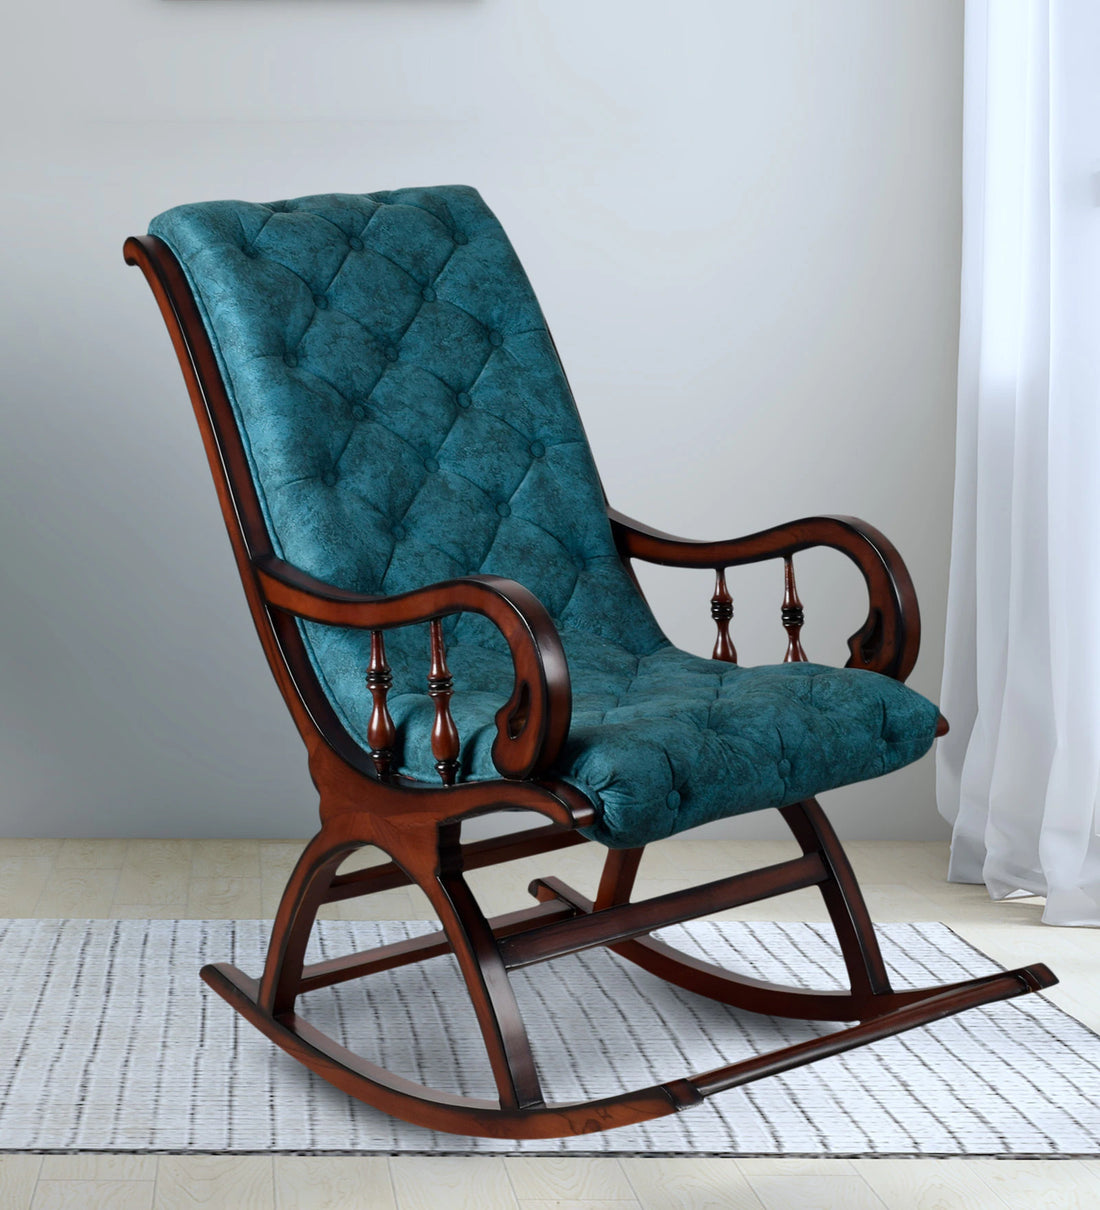 The history of rocking chairs